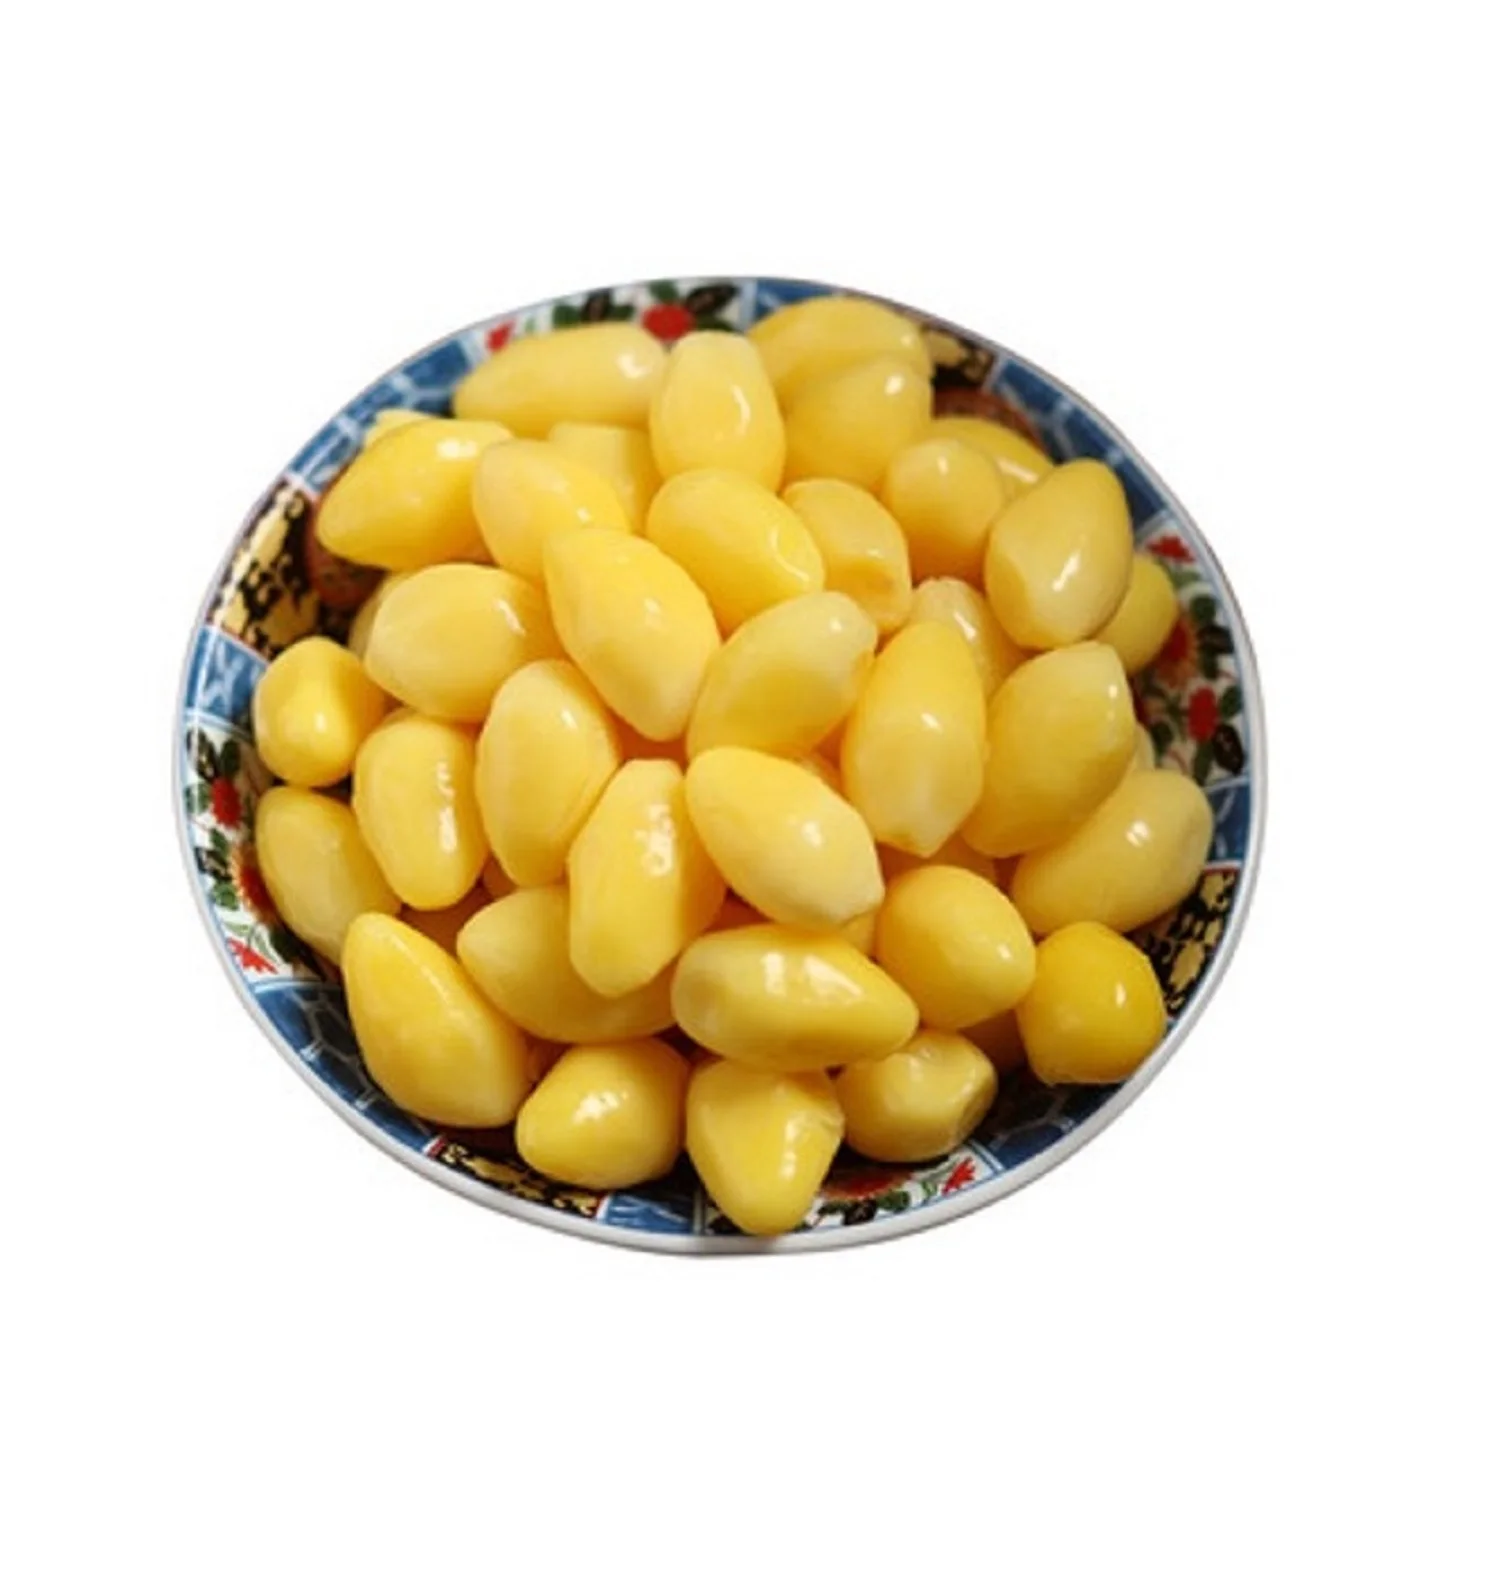 Available Bulk Stock Of Organic Dried GINKGO NUTS At Lowest Prices